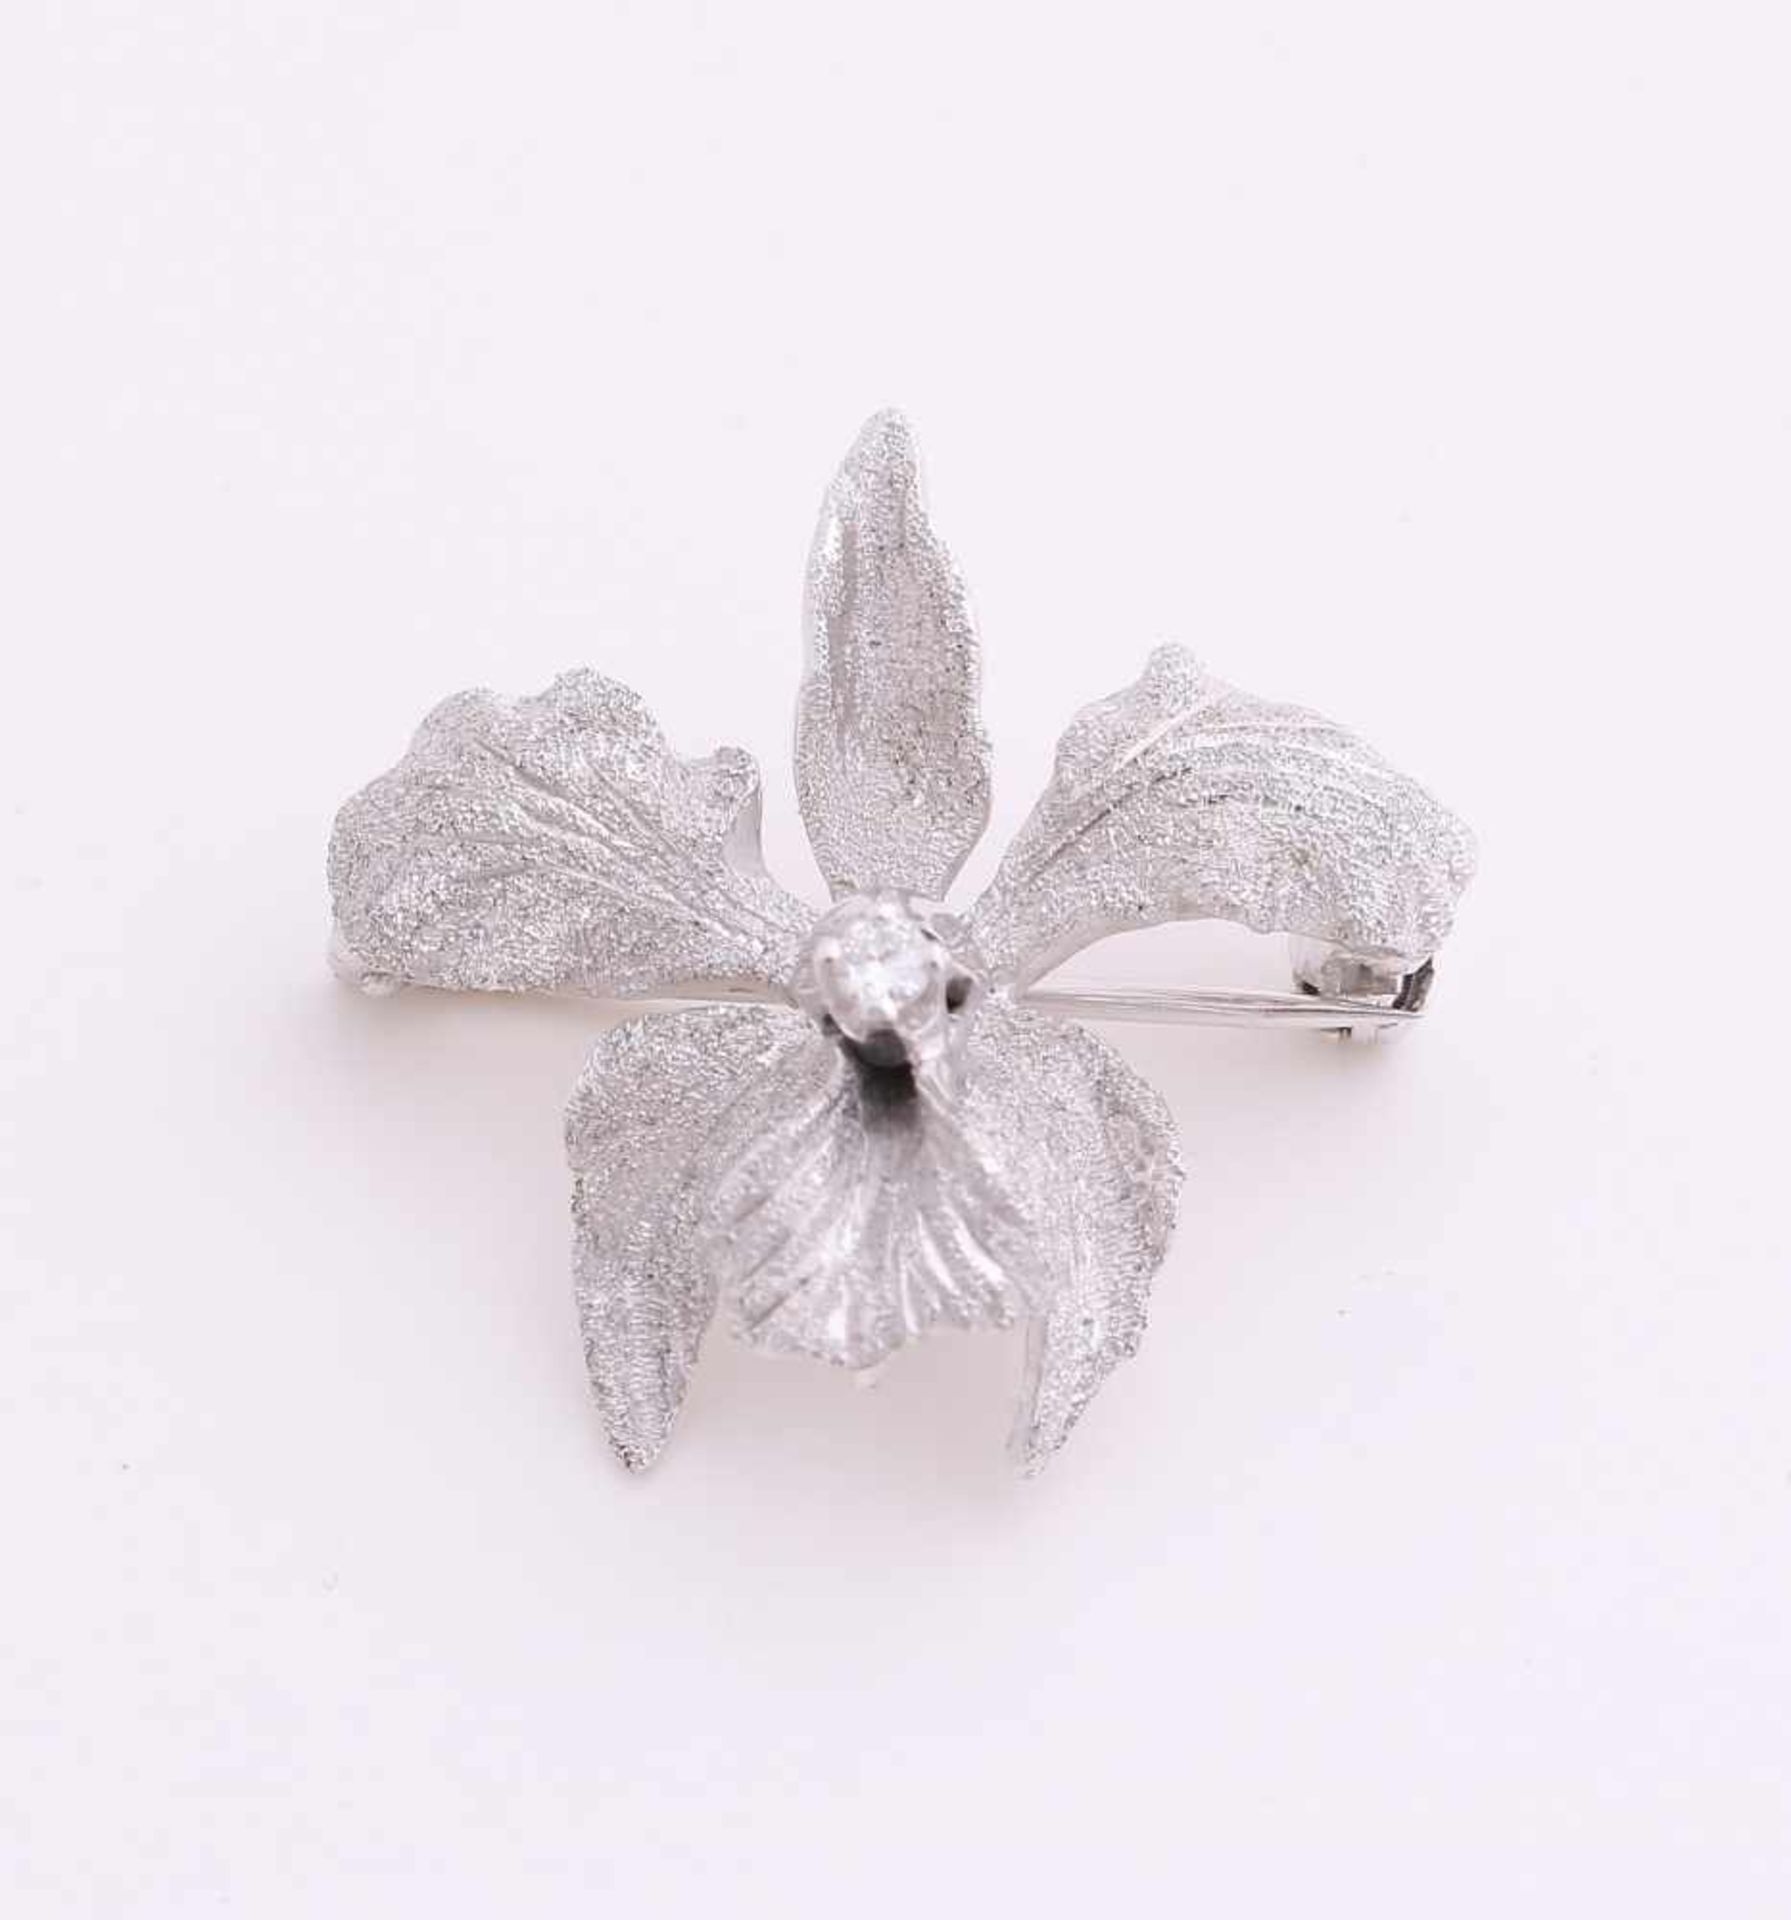 White gold brooch in the shape of a flower, 585/000, having a matted operation and set with a